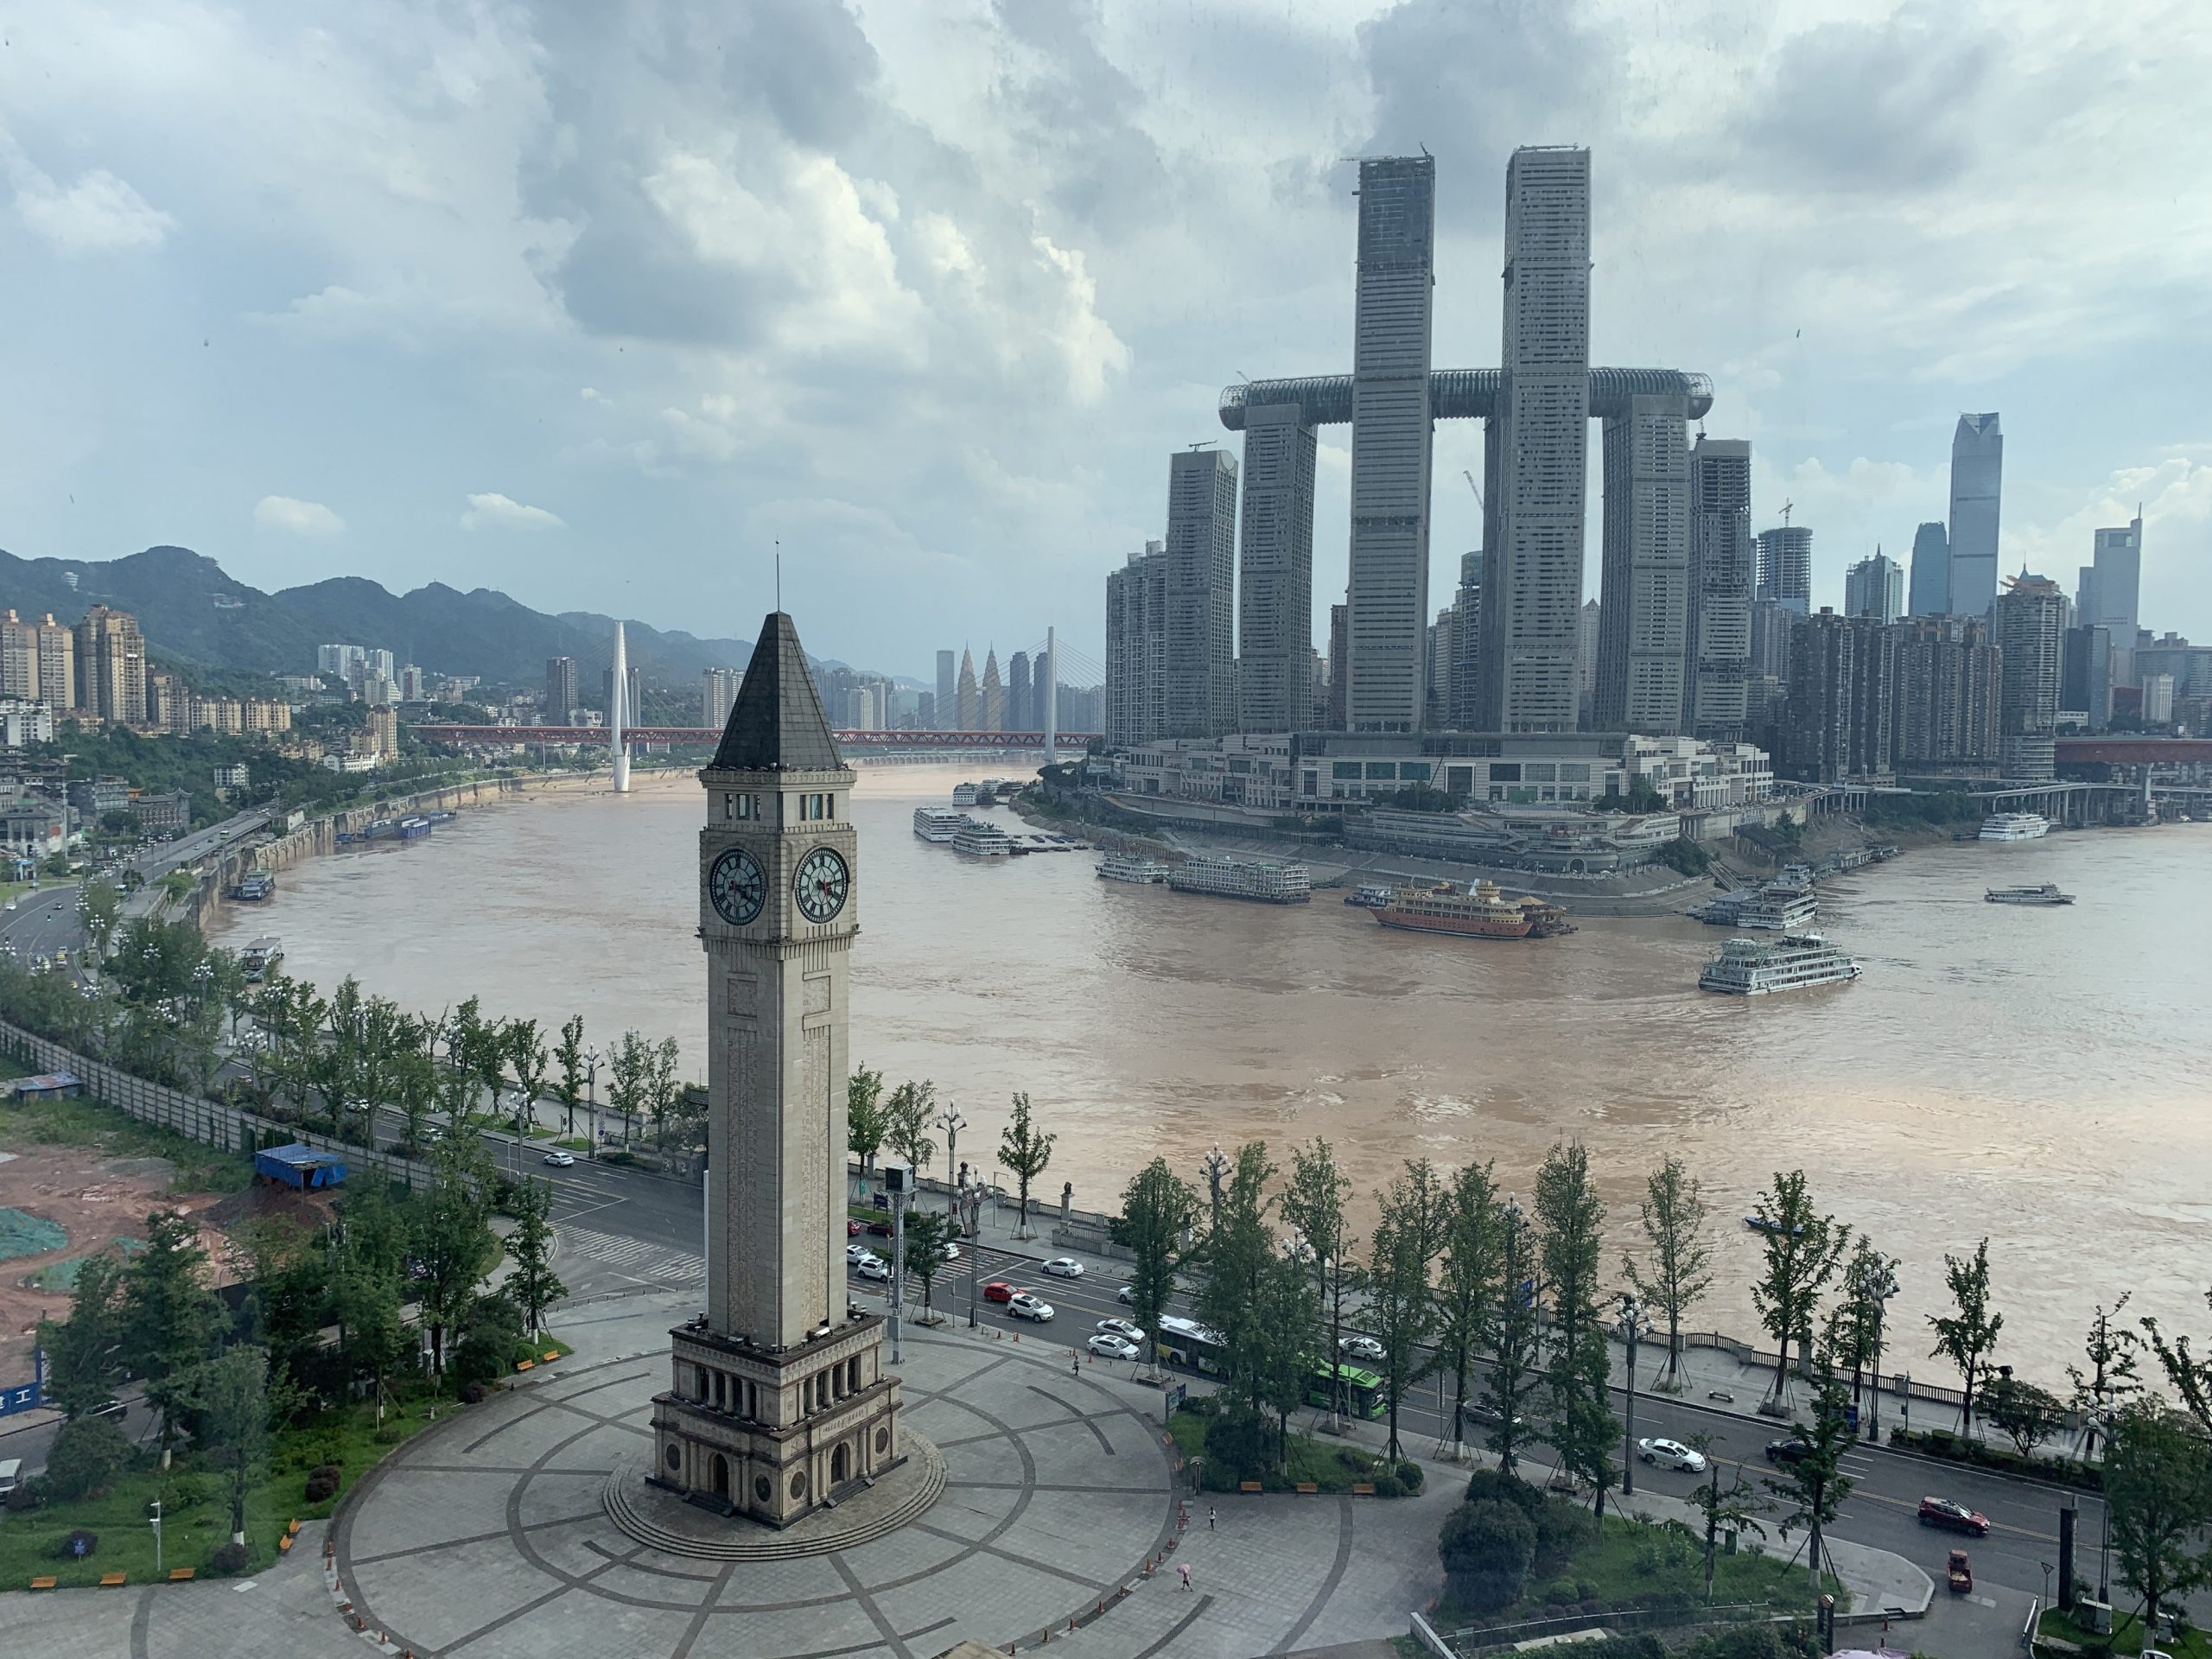 Clock tower of Chongqing in foreground with new skyscrapers under construction in the background